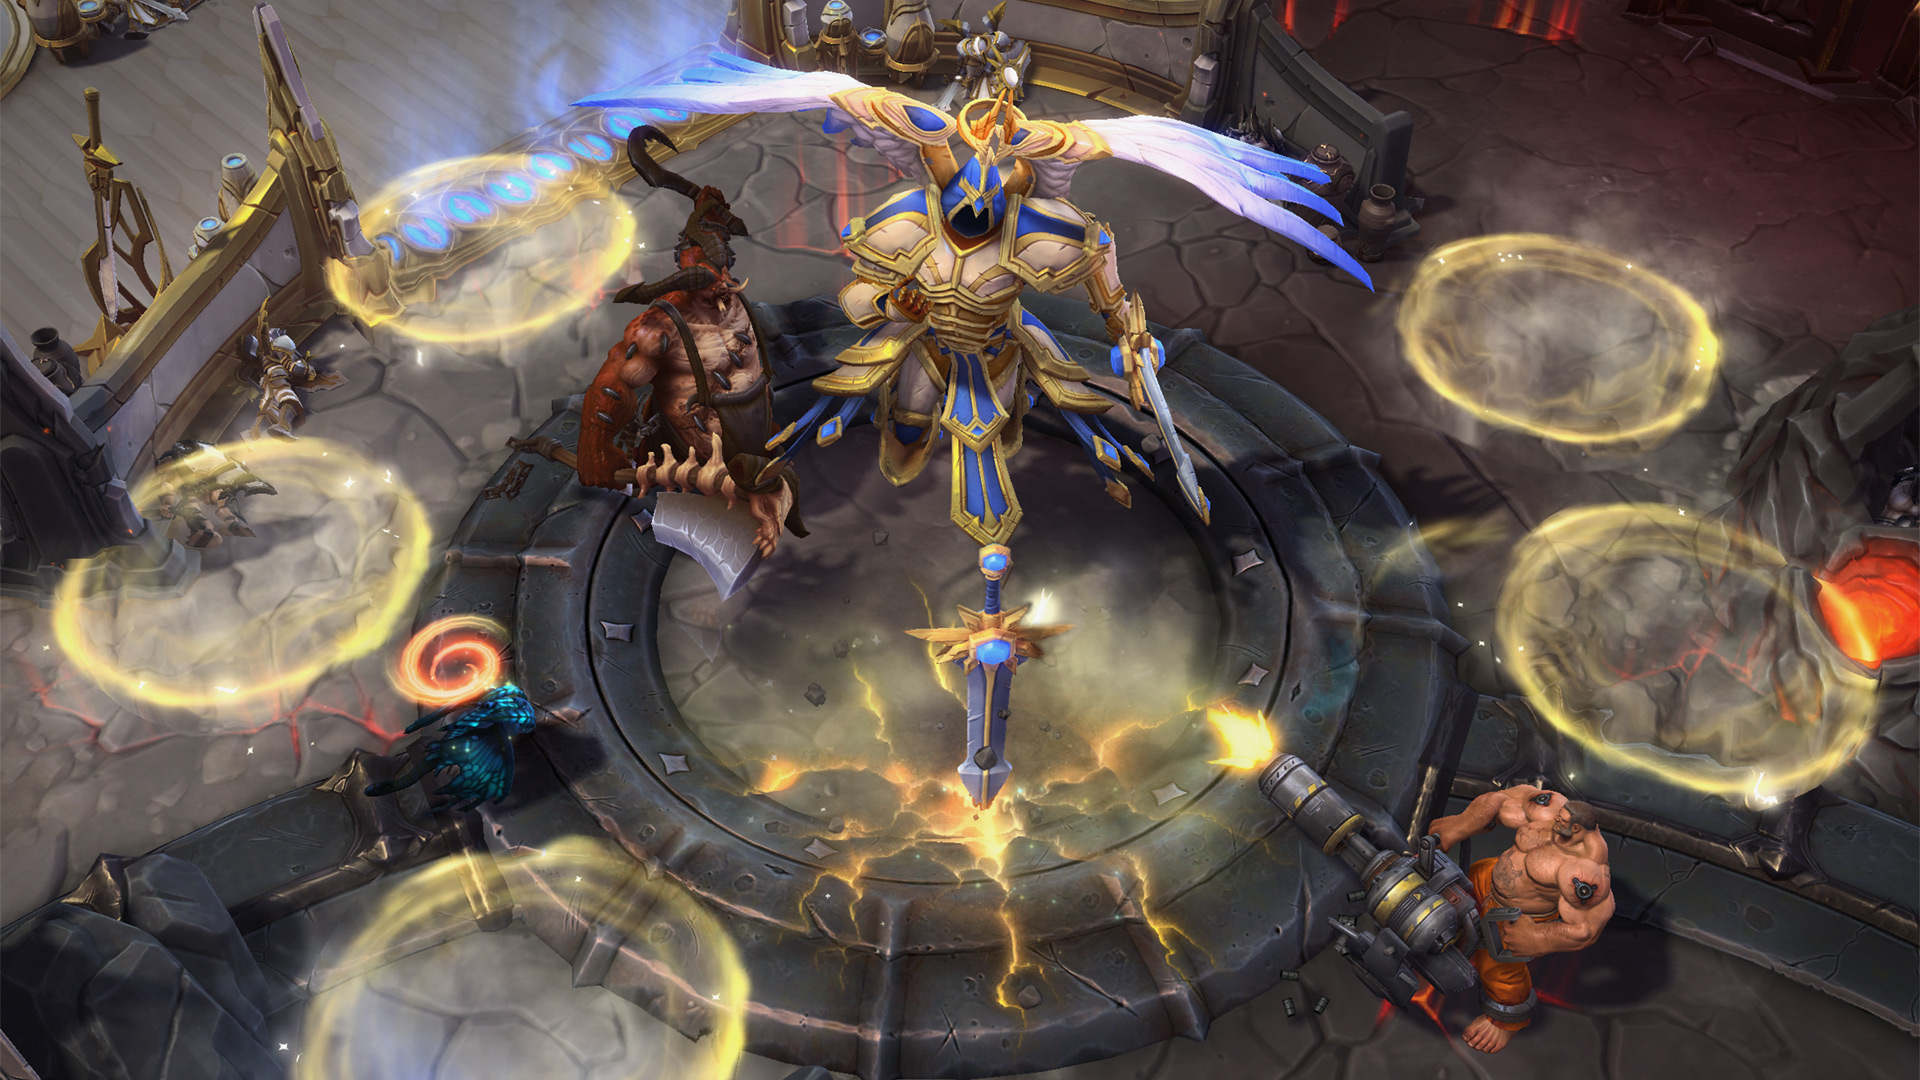 Why Blizzard says Heroes of the Storm is a 'hero brawler